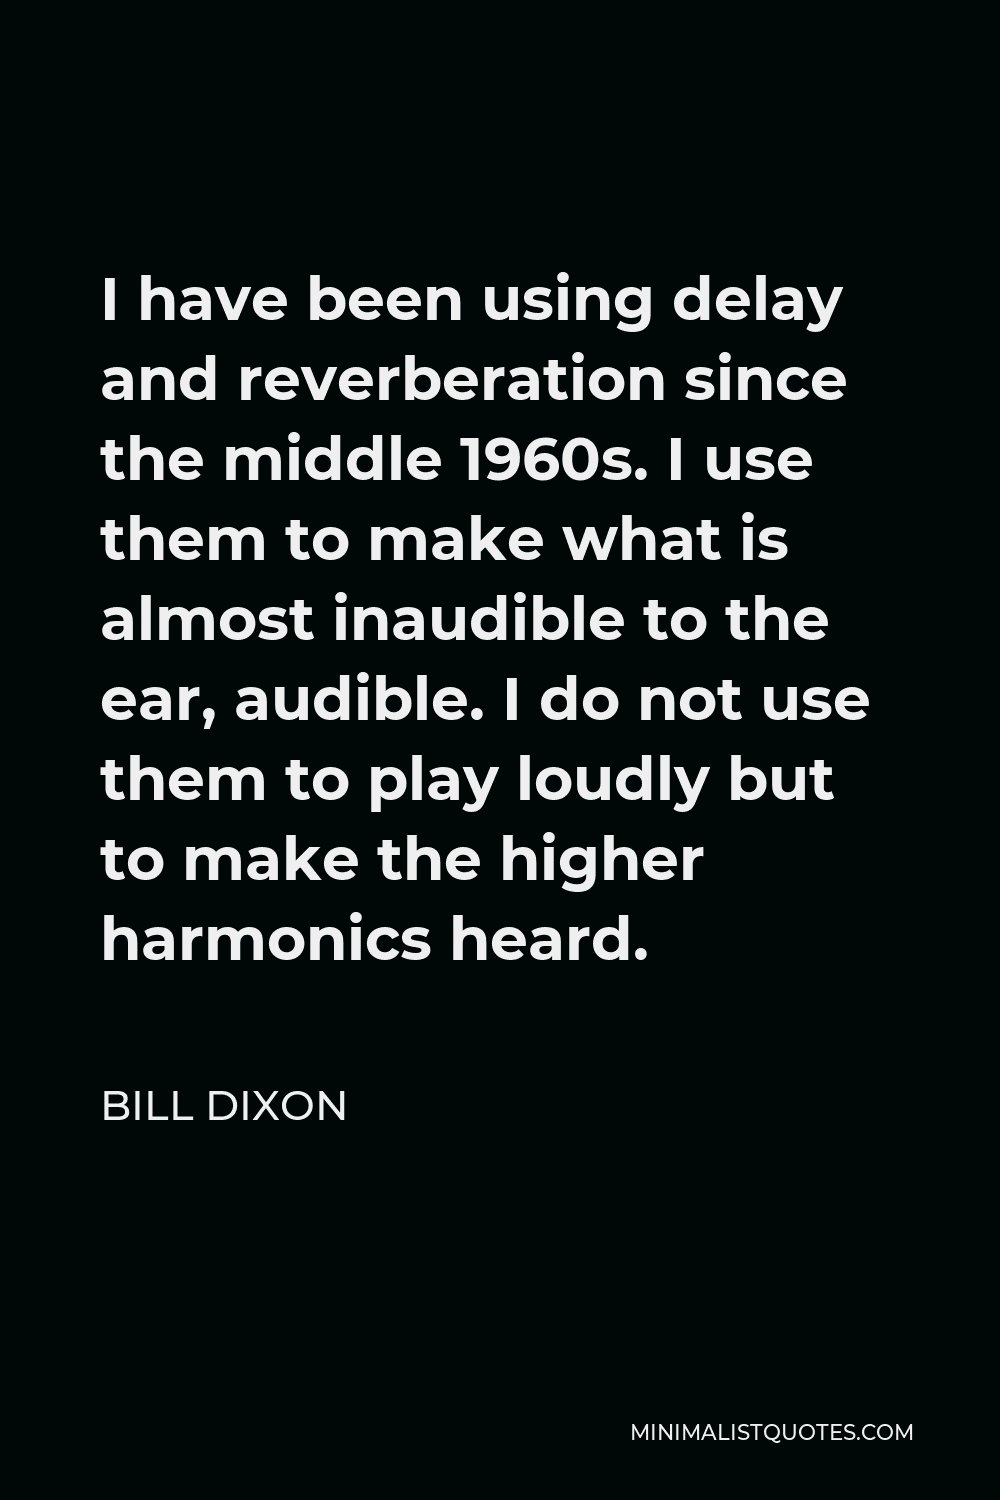 Bill Dixon Quote - I have been using delay and reverberation since the middle 1960s. I use them to make what is almost inaudible to the ear, audible. I do not use them to play loudly but to make the higher harmonics heard.